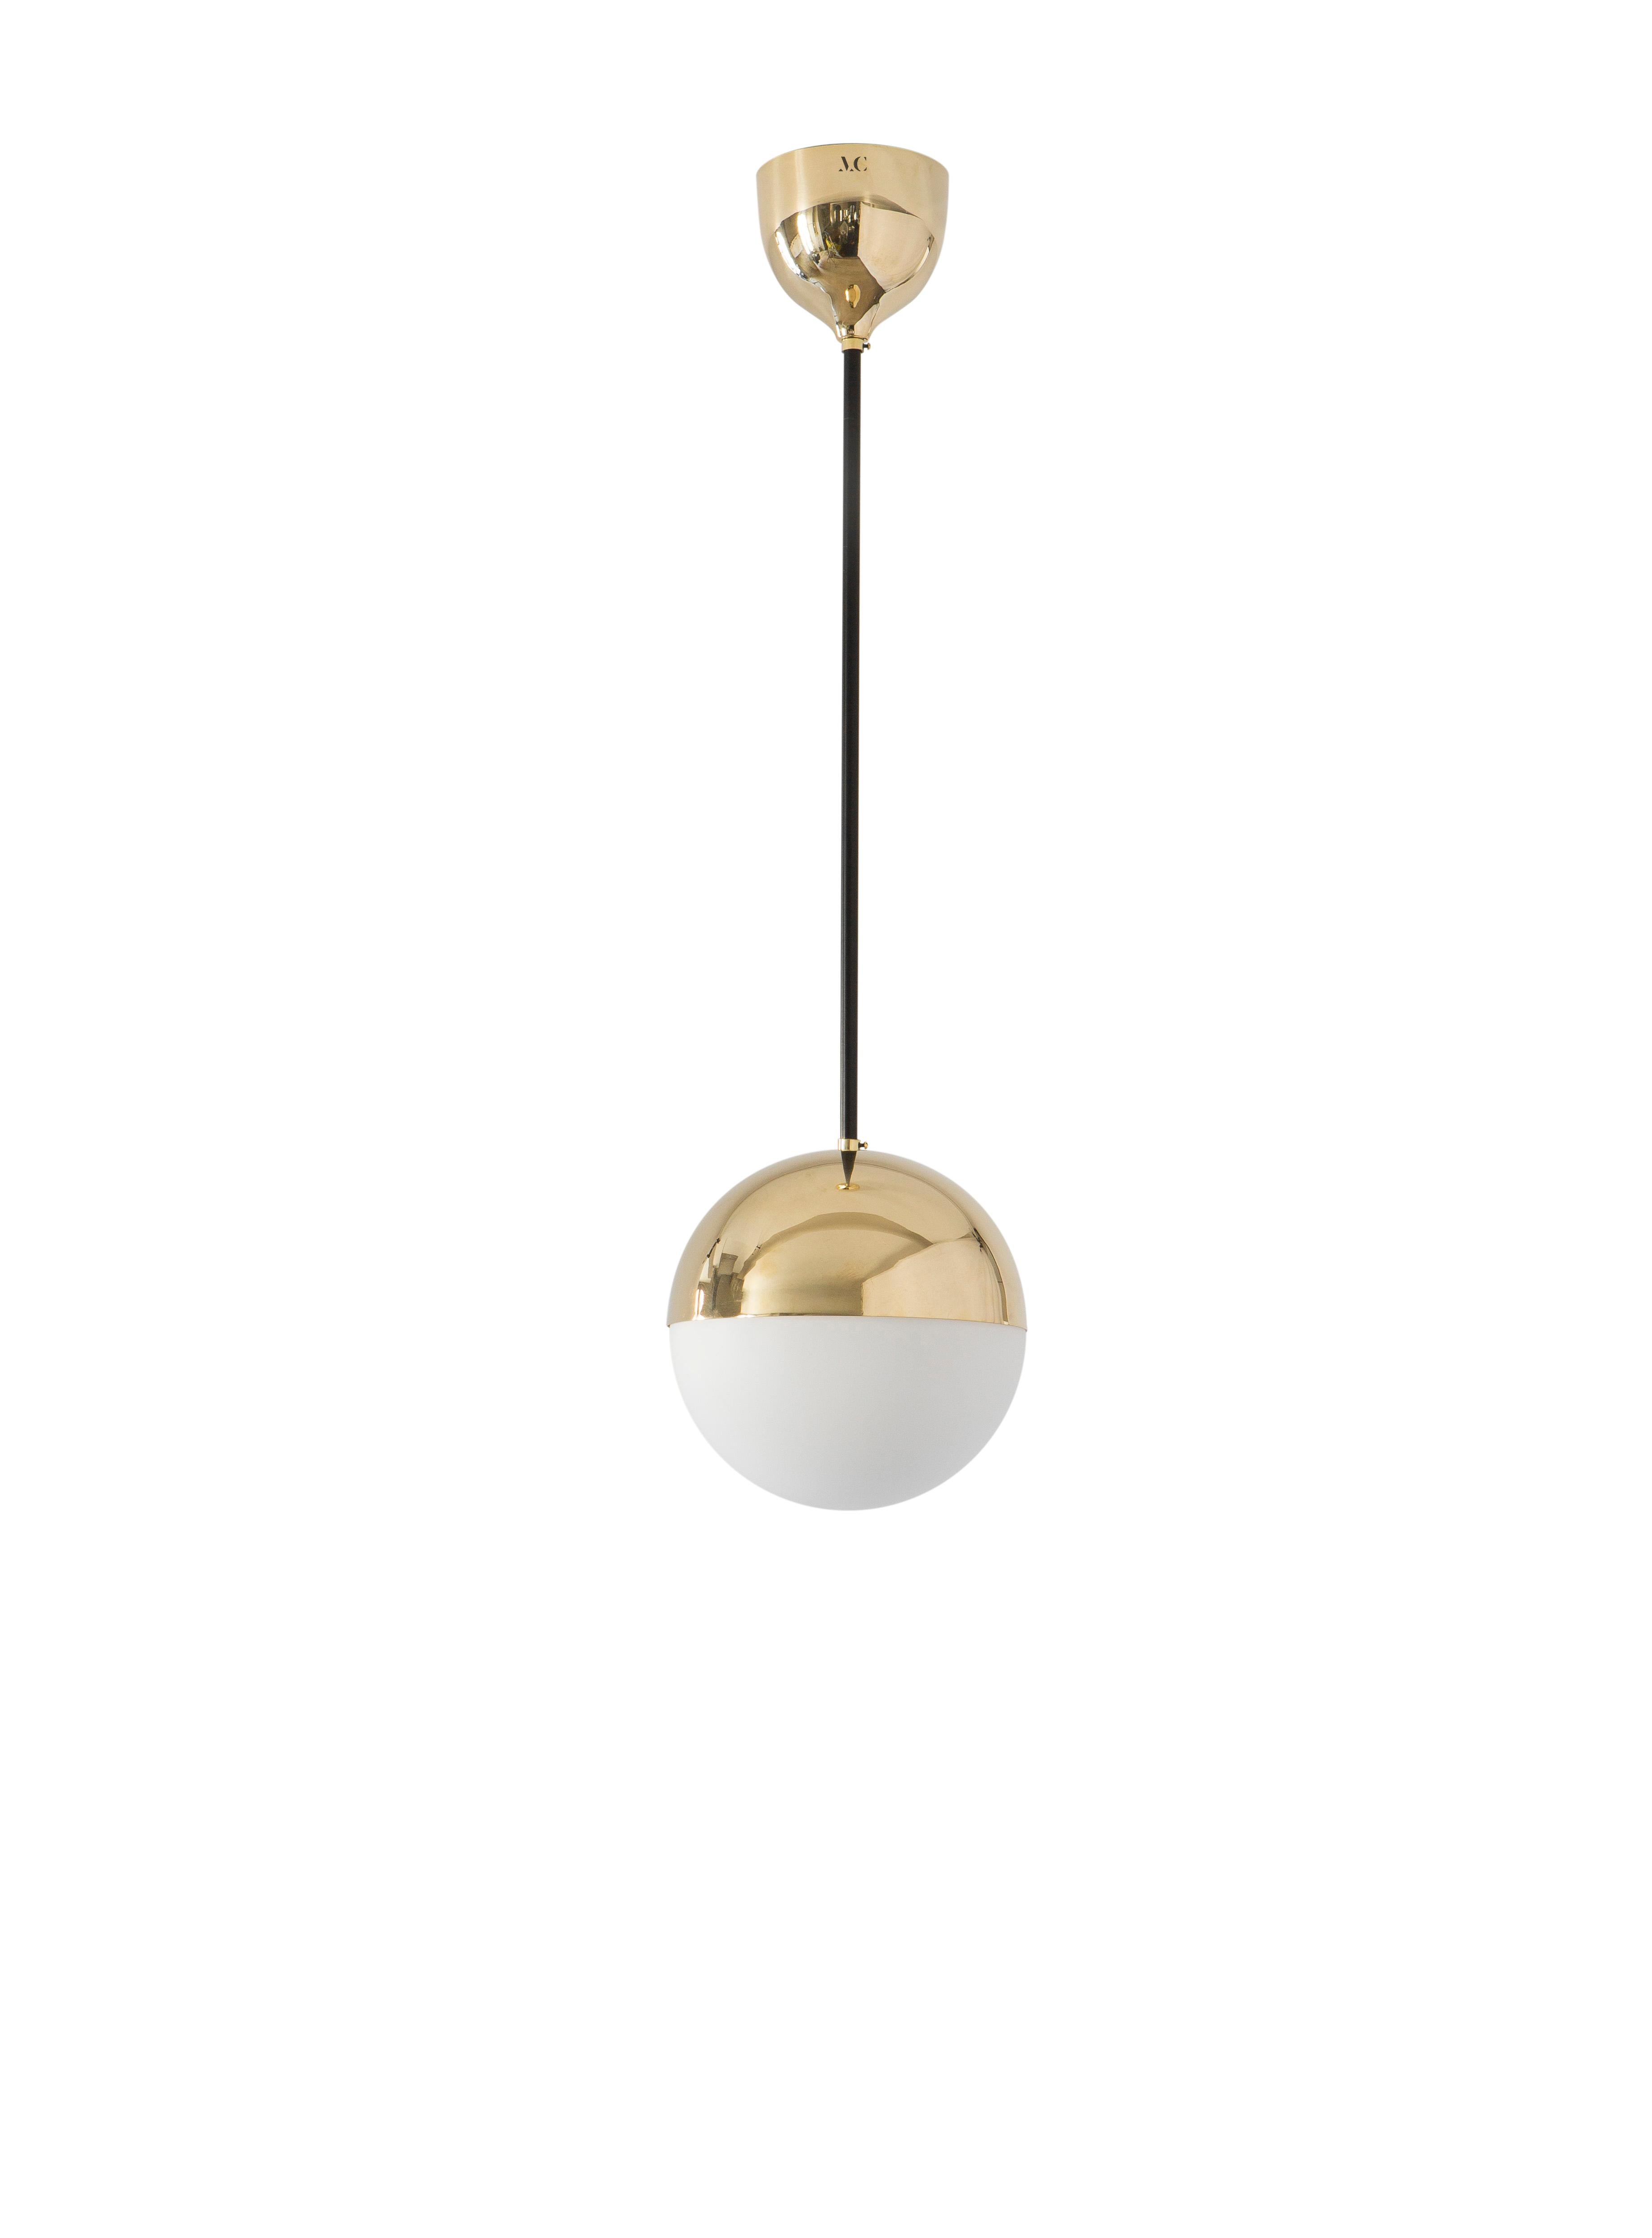 Pair of pendants 01 black tube by Magic Circus Editions
Dimensions: D 25 x W 25 x H 110 cm, also available in H 90, 130, 150, 175, 190 cm
Materials: Brass, mouth blown glass

All our lamps can be wired according to each country. If sold to the